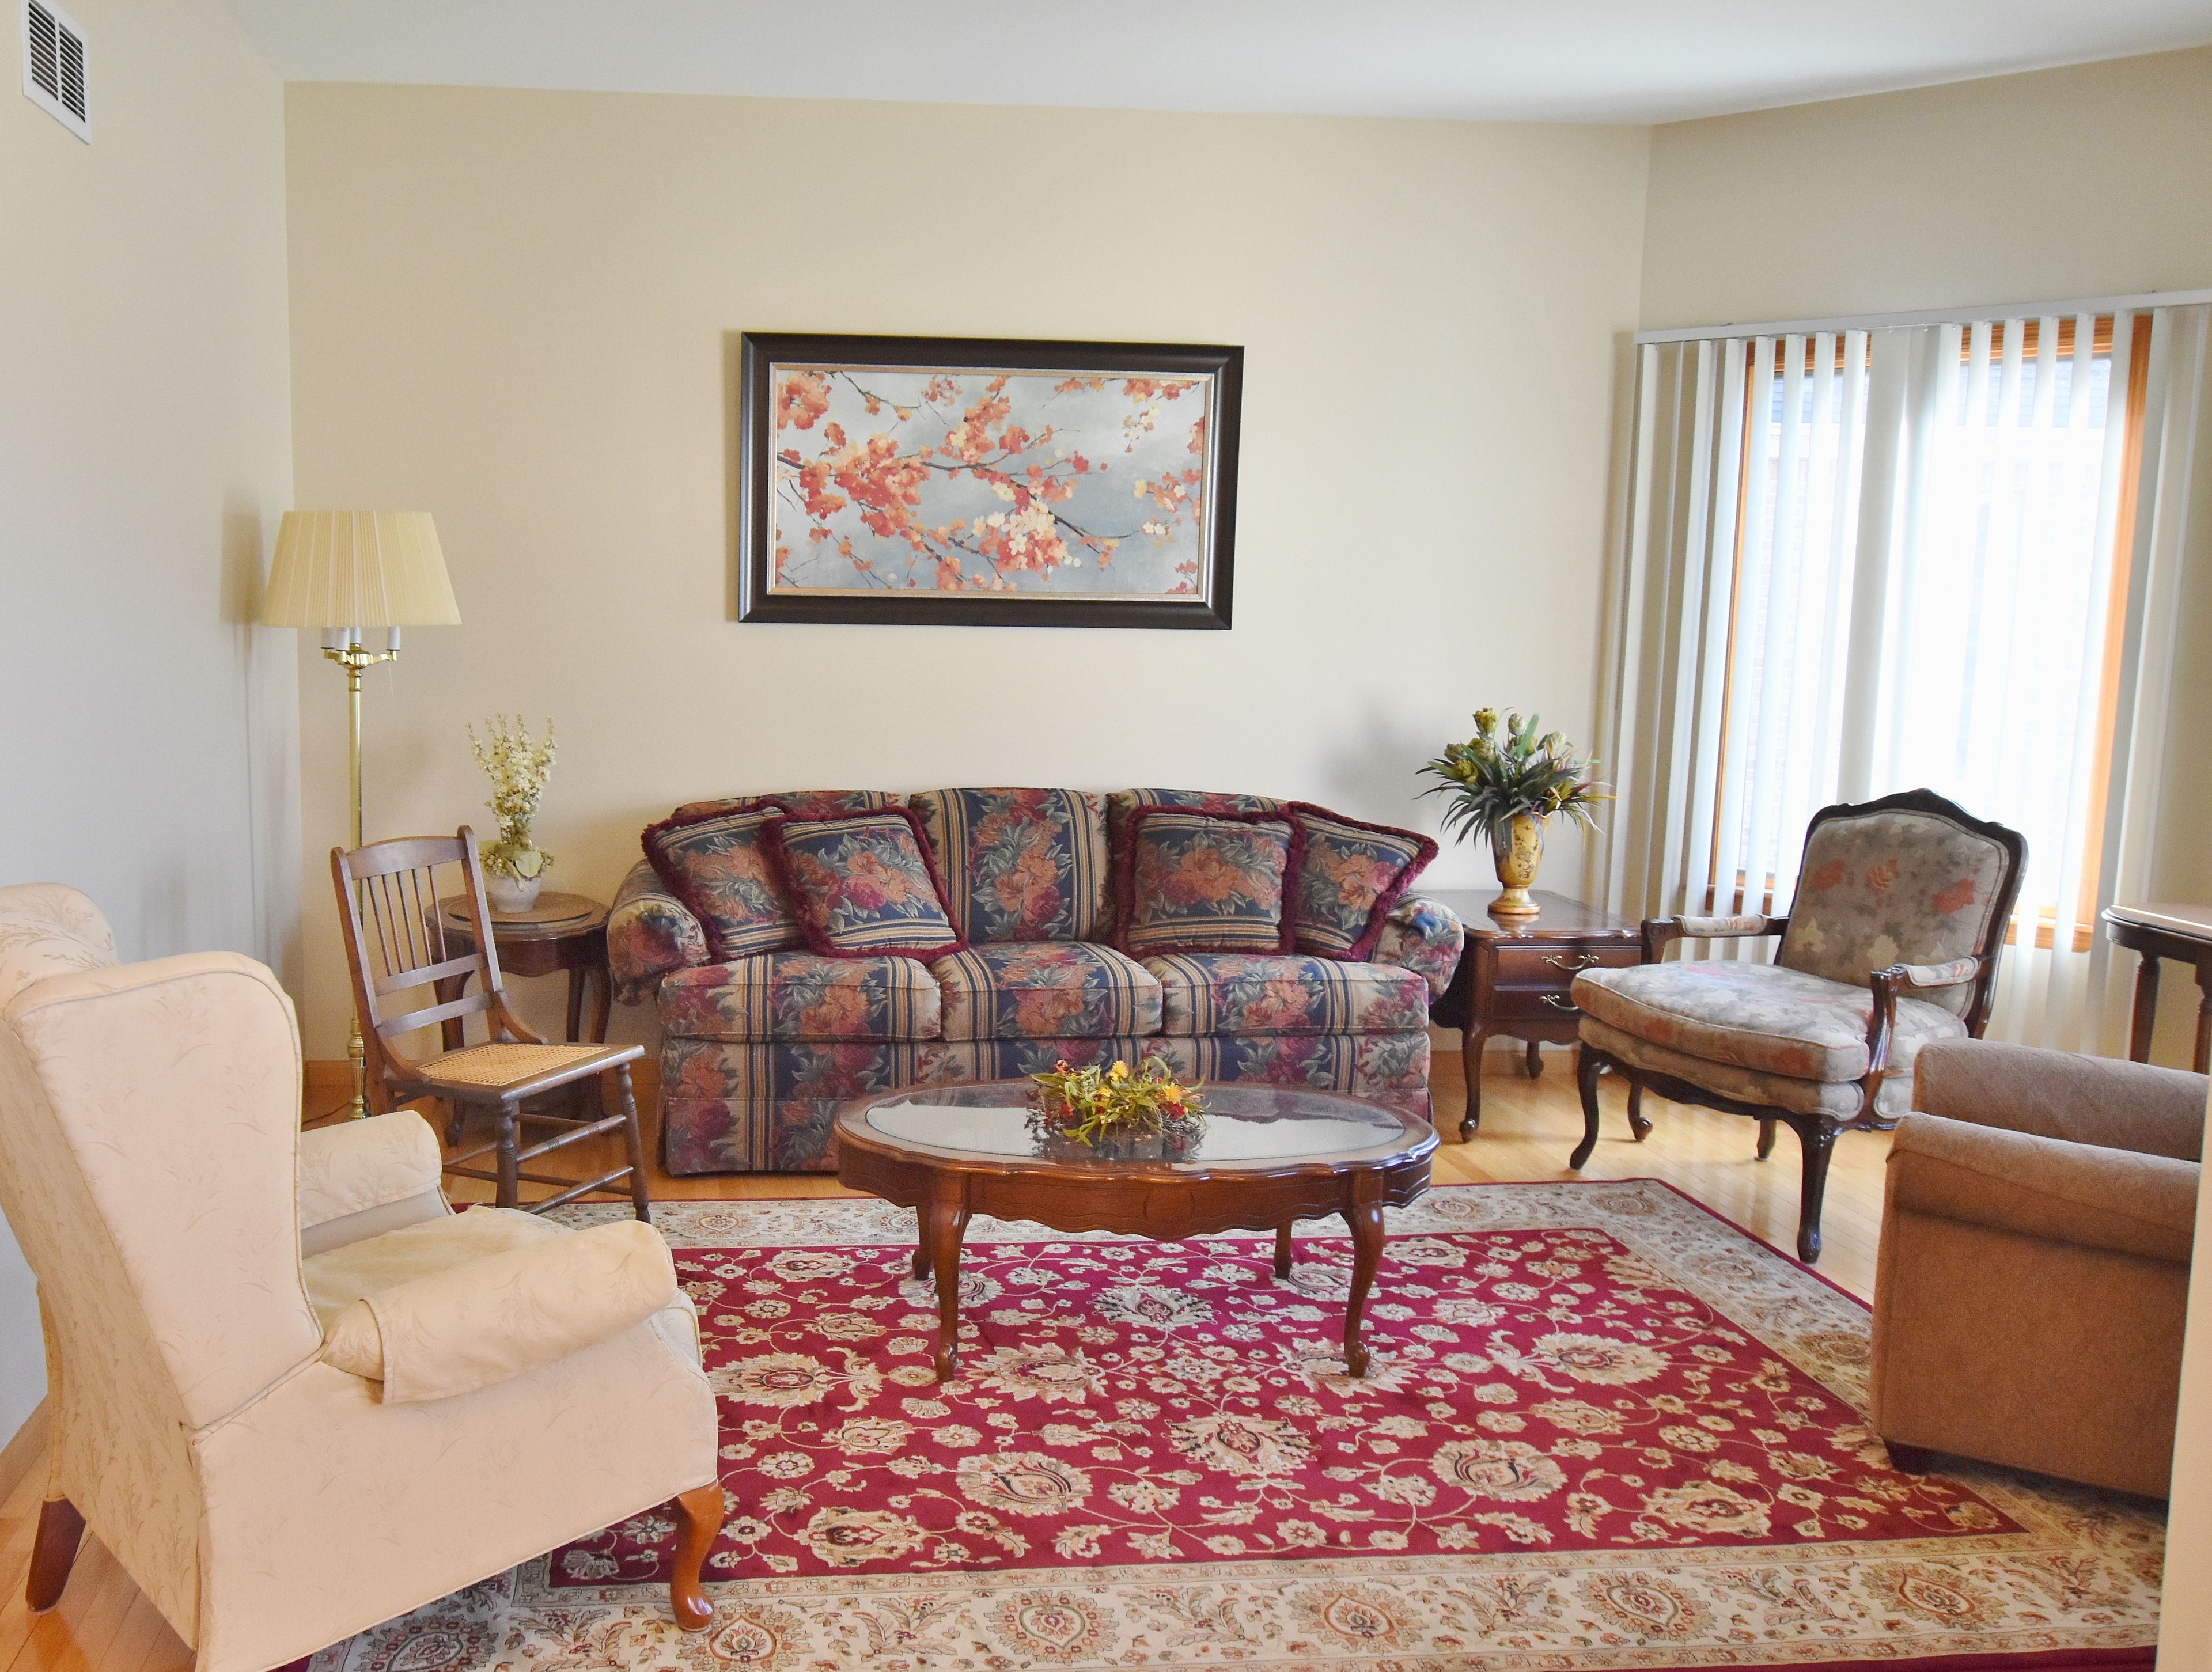 Interior view of Willow Crossing Senior Living featuring modern architecture, cozy furniture, and tasteful decor.